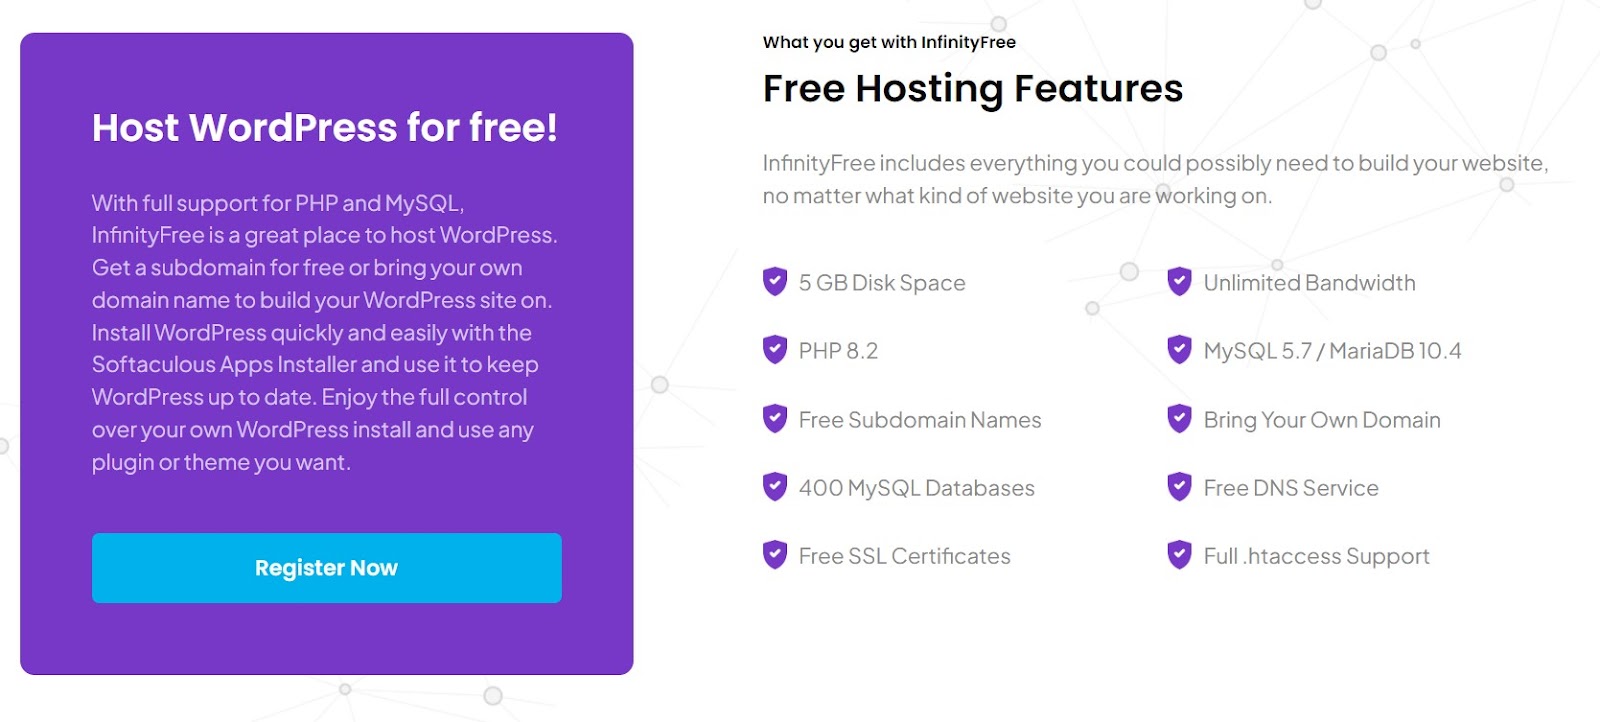 InfinityFree free web hosting features